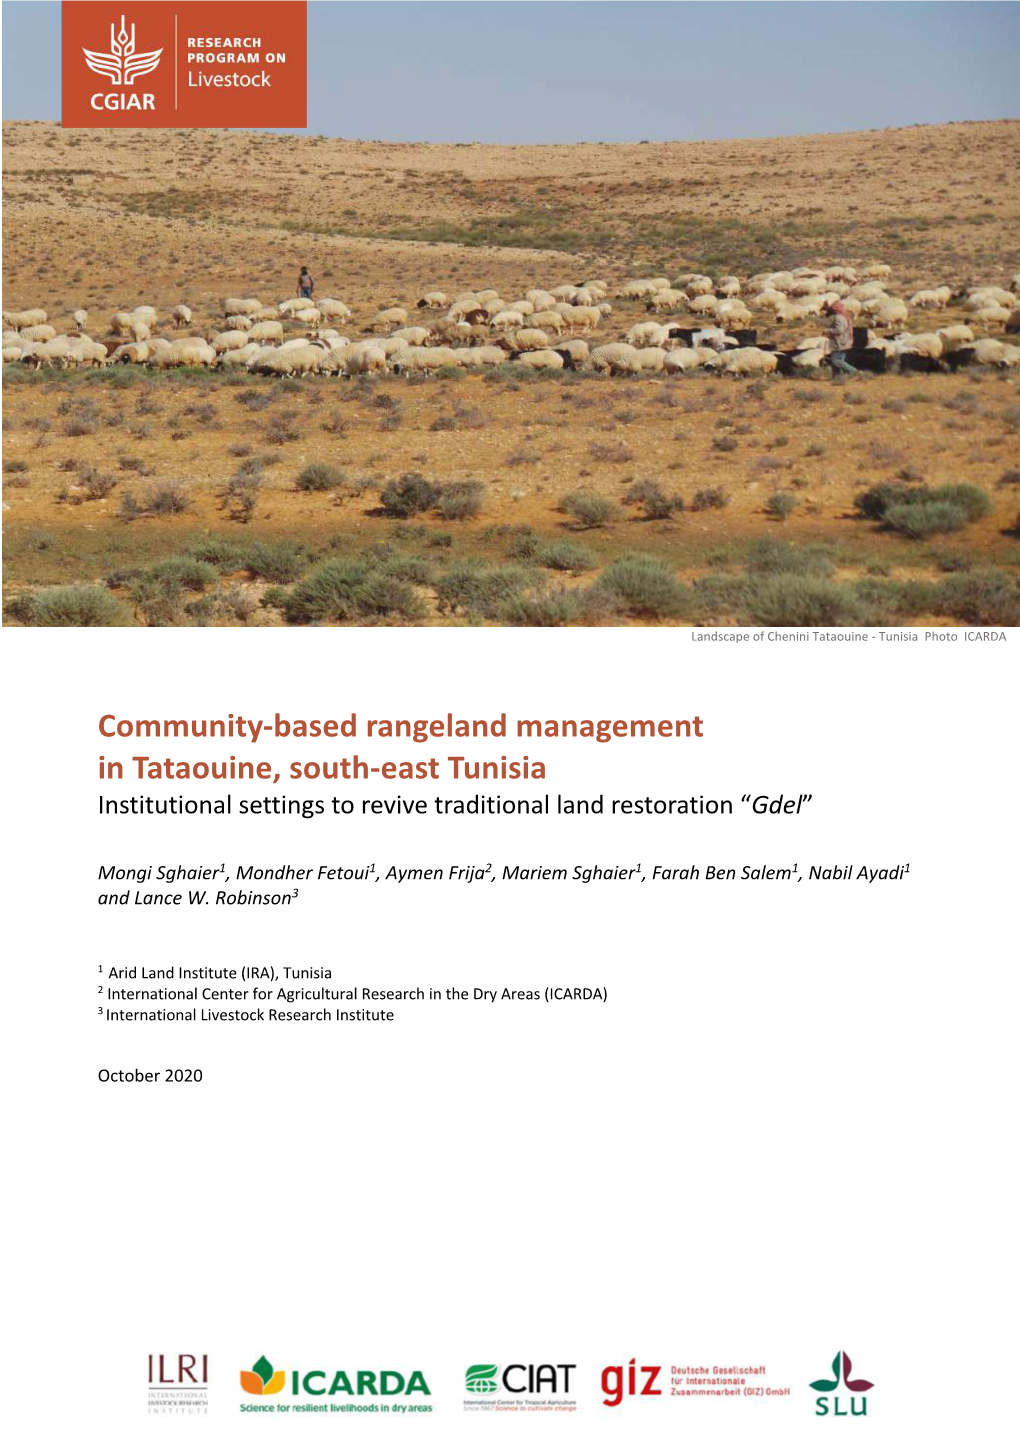 Community-Based Rangeland Management in Tataouine, South-East Tunisia Institutional Settings to Revive Traditional Land Restoration “Gdel”